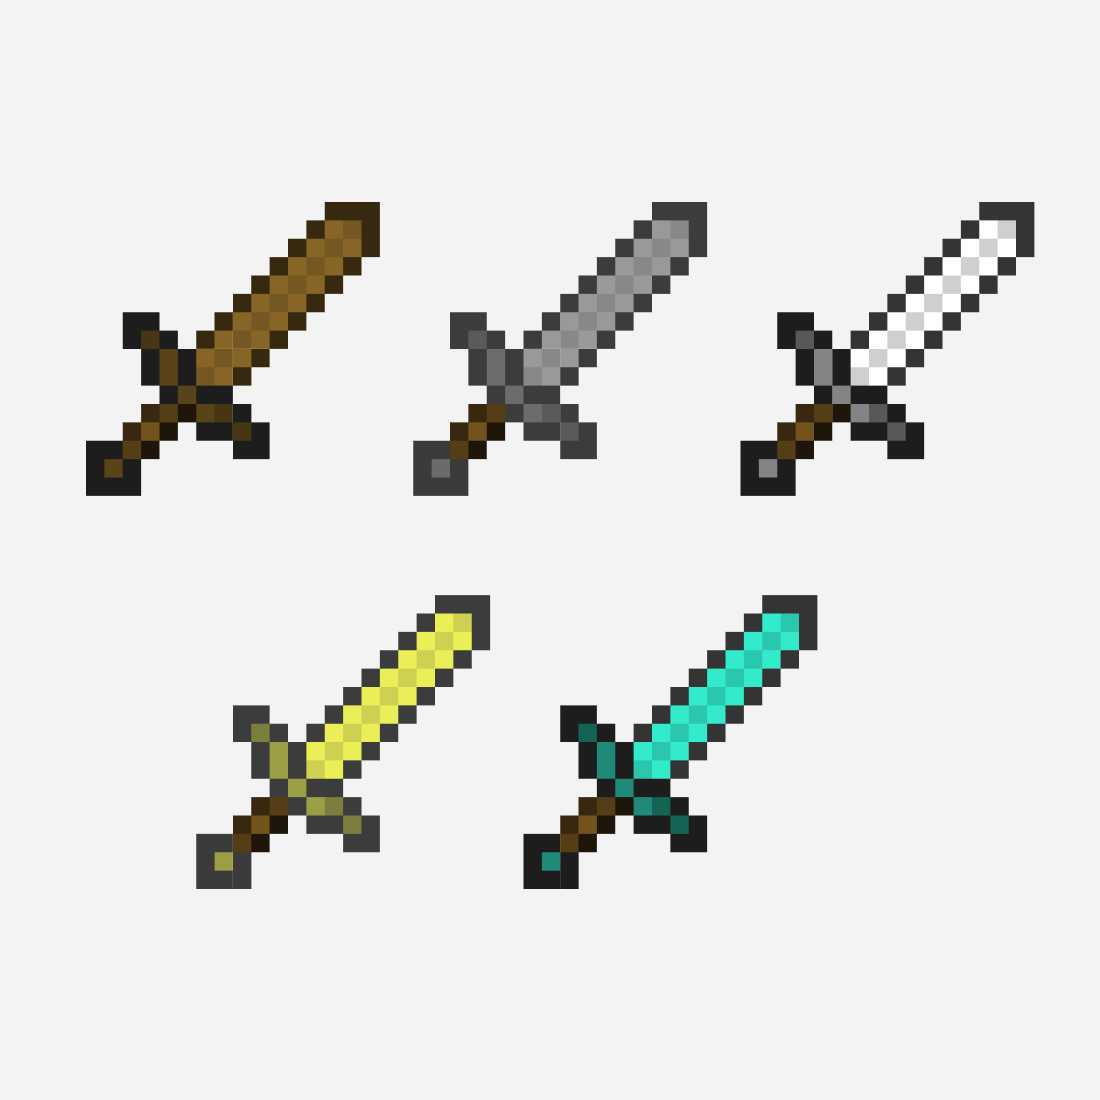 Weapons helping in the game of minecraft from different materials.